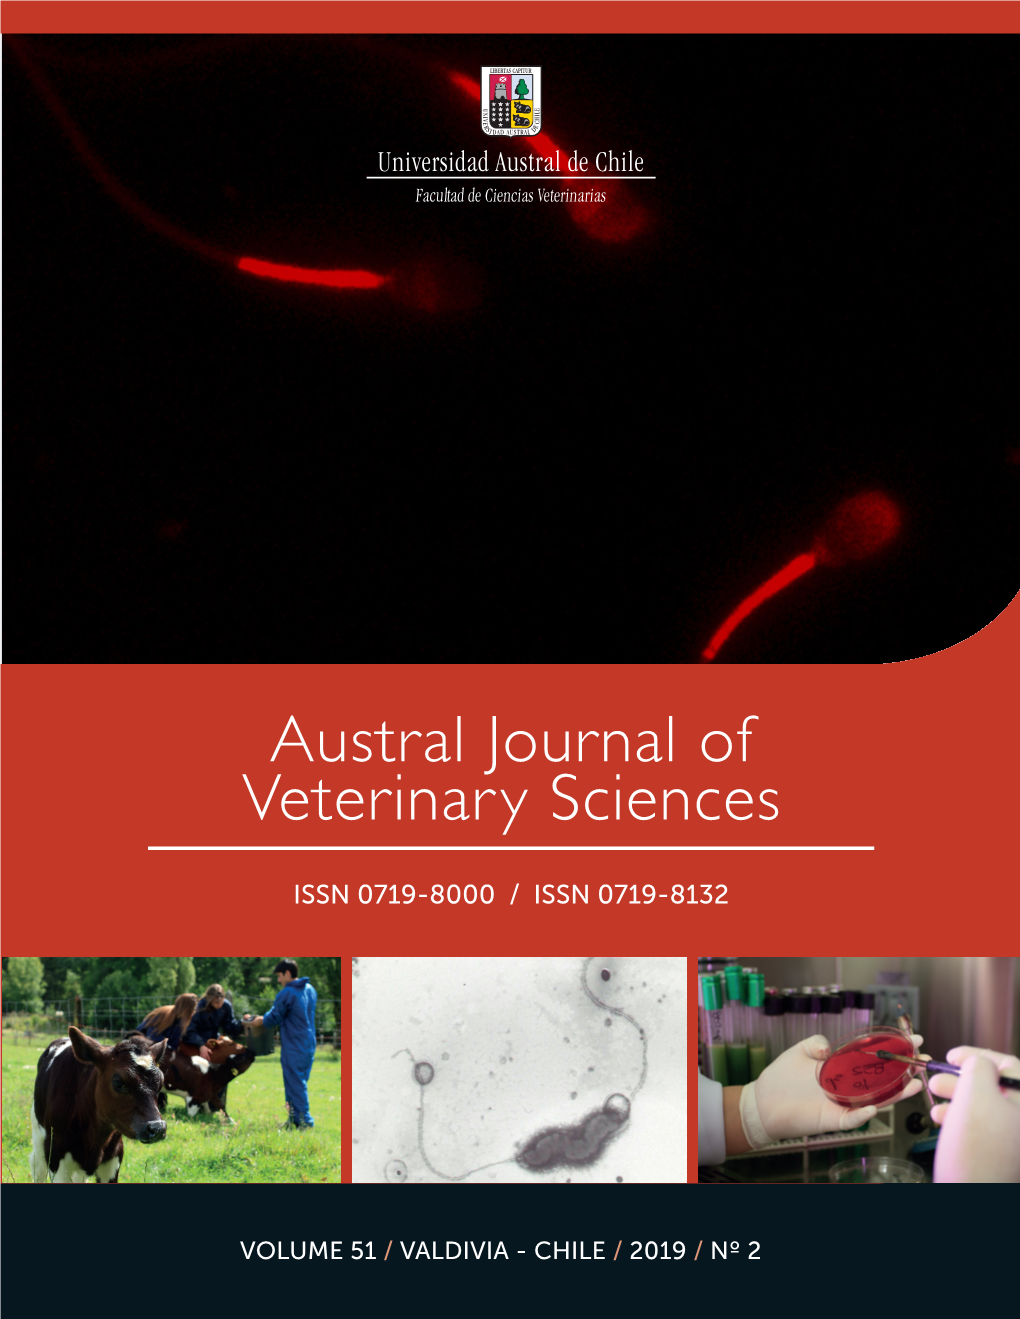 Austral Journal of Veterinary Sciences